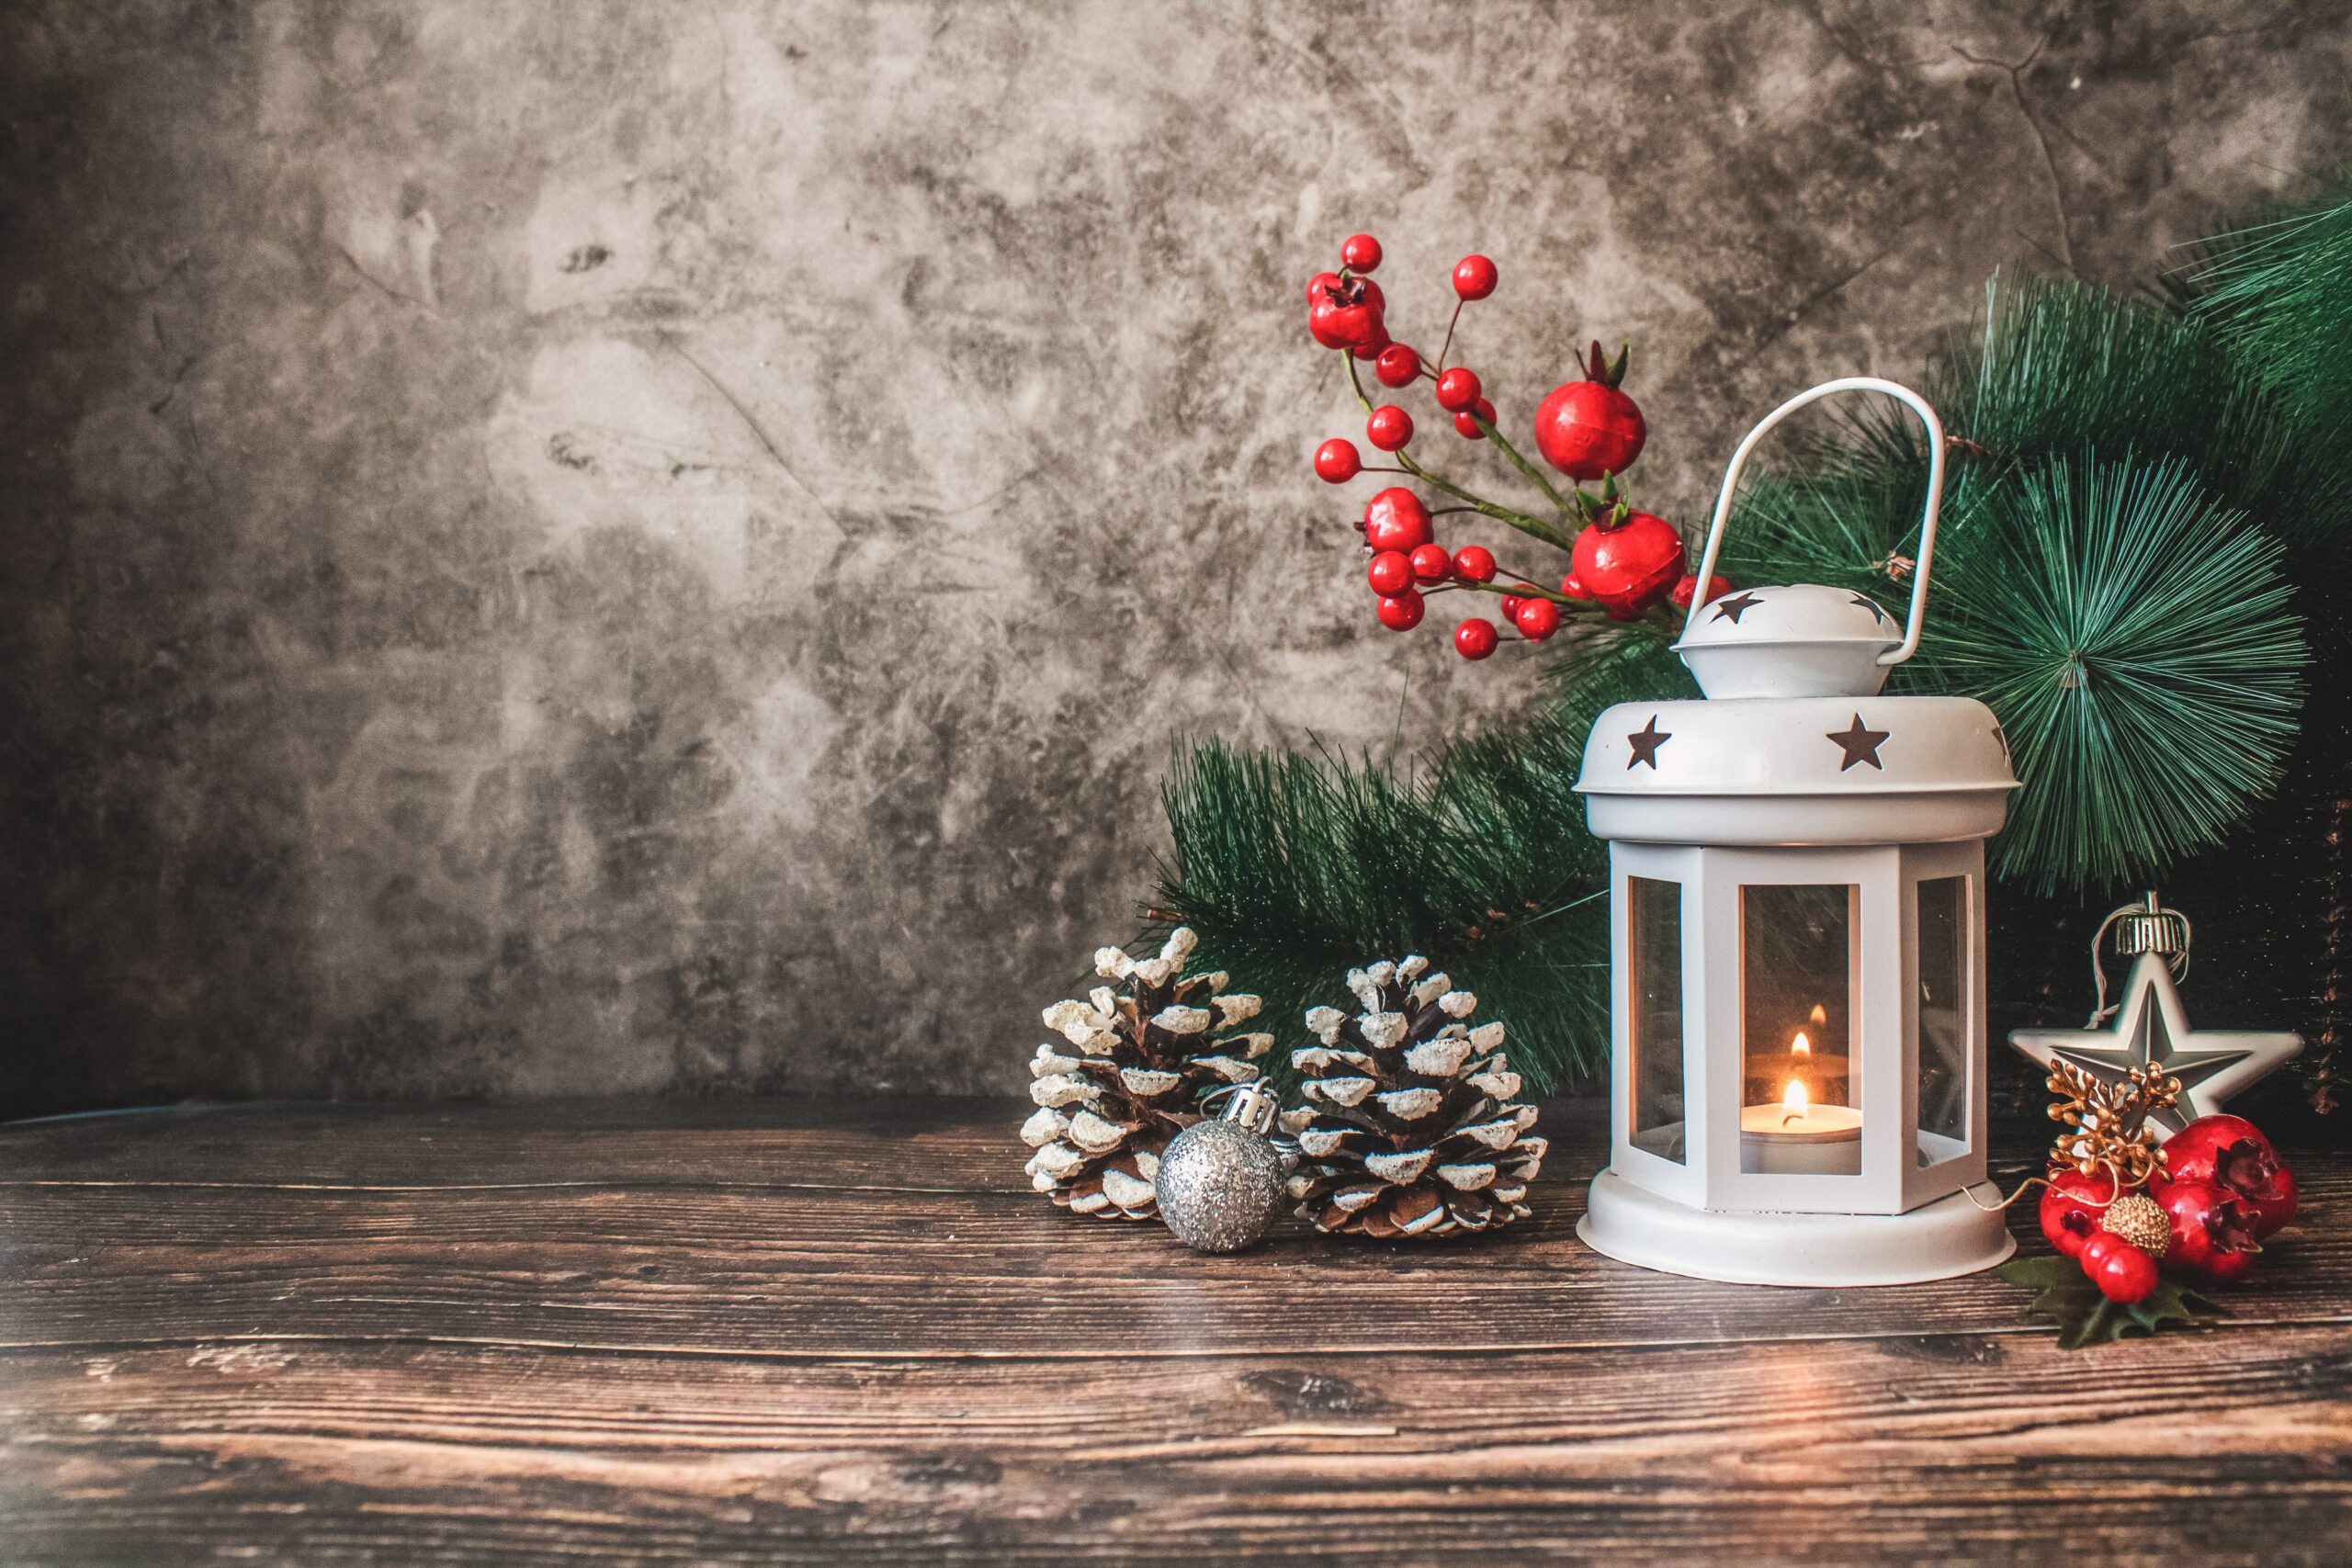 Christmas scene with lantern and pinecones